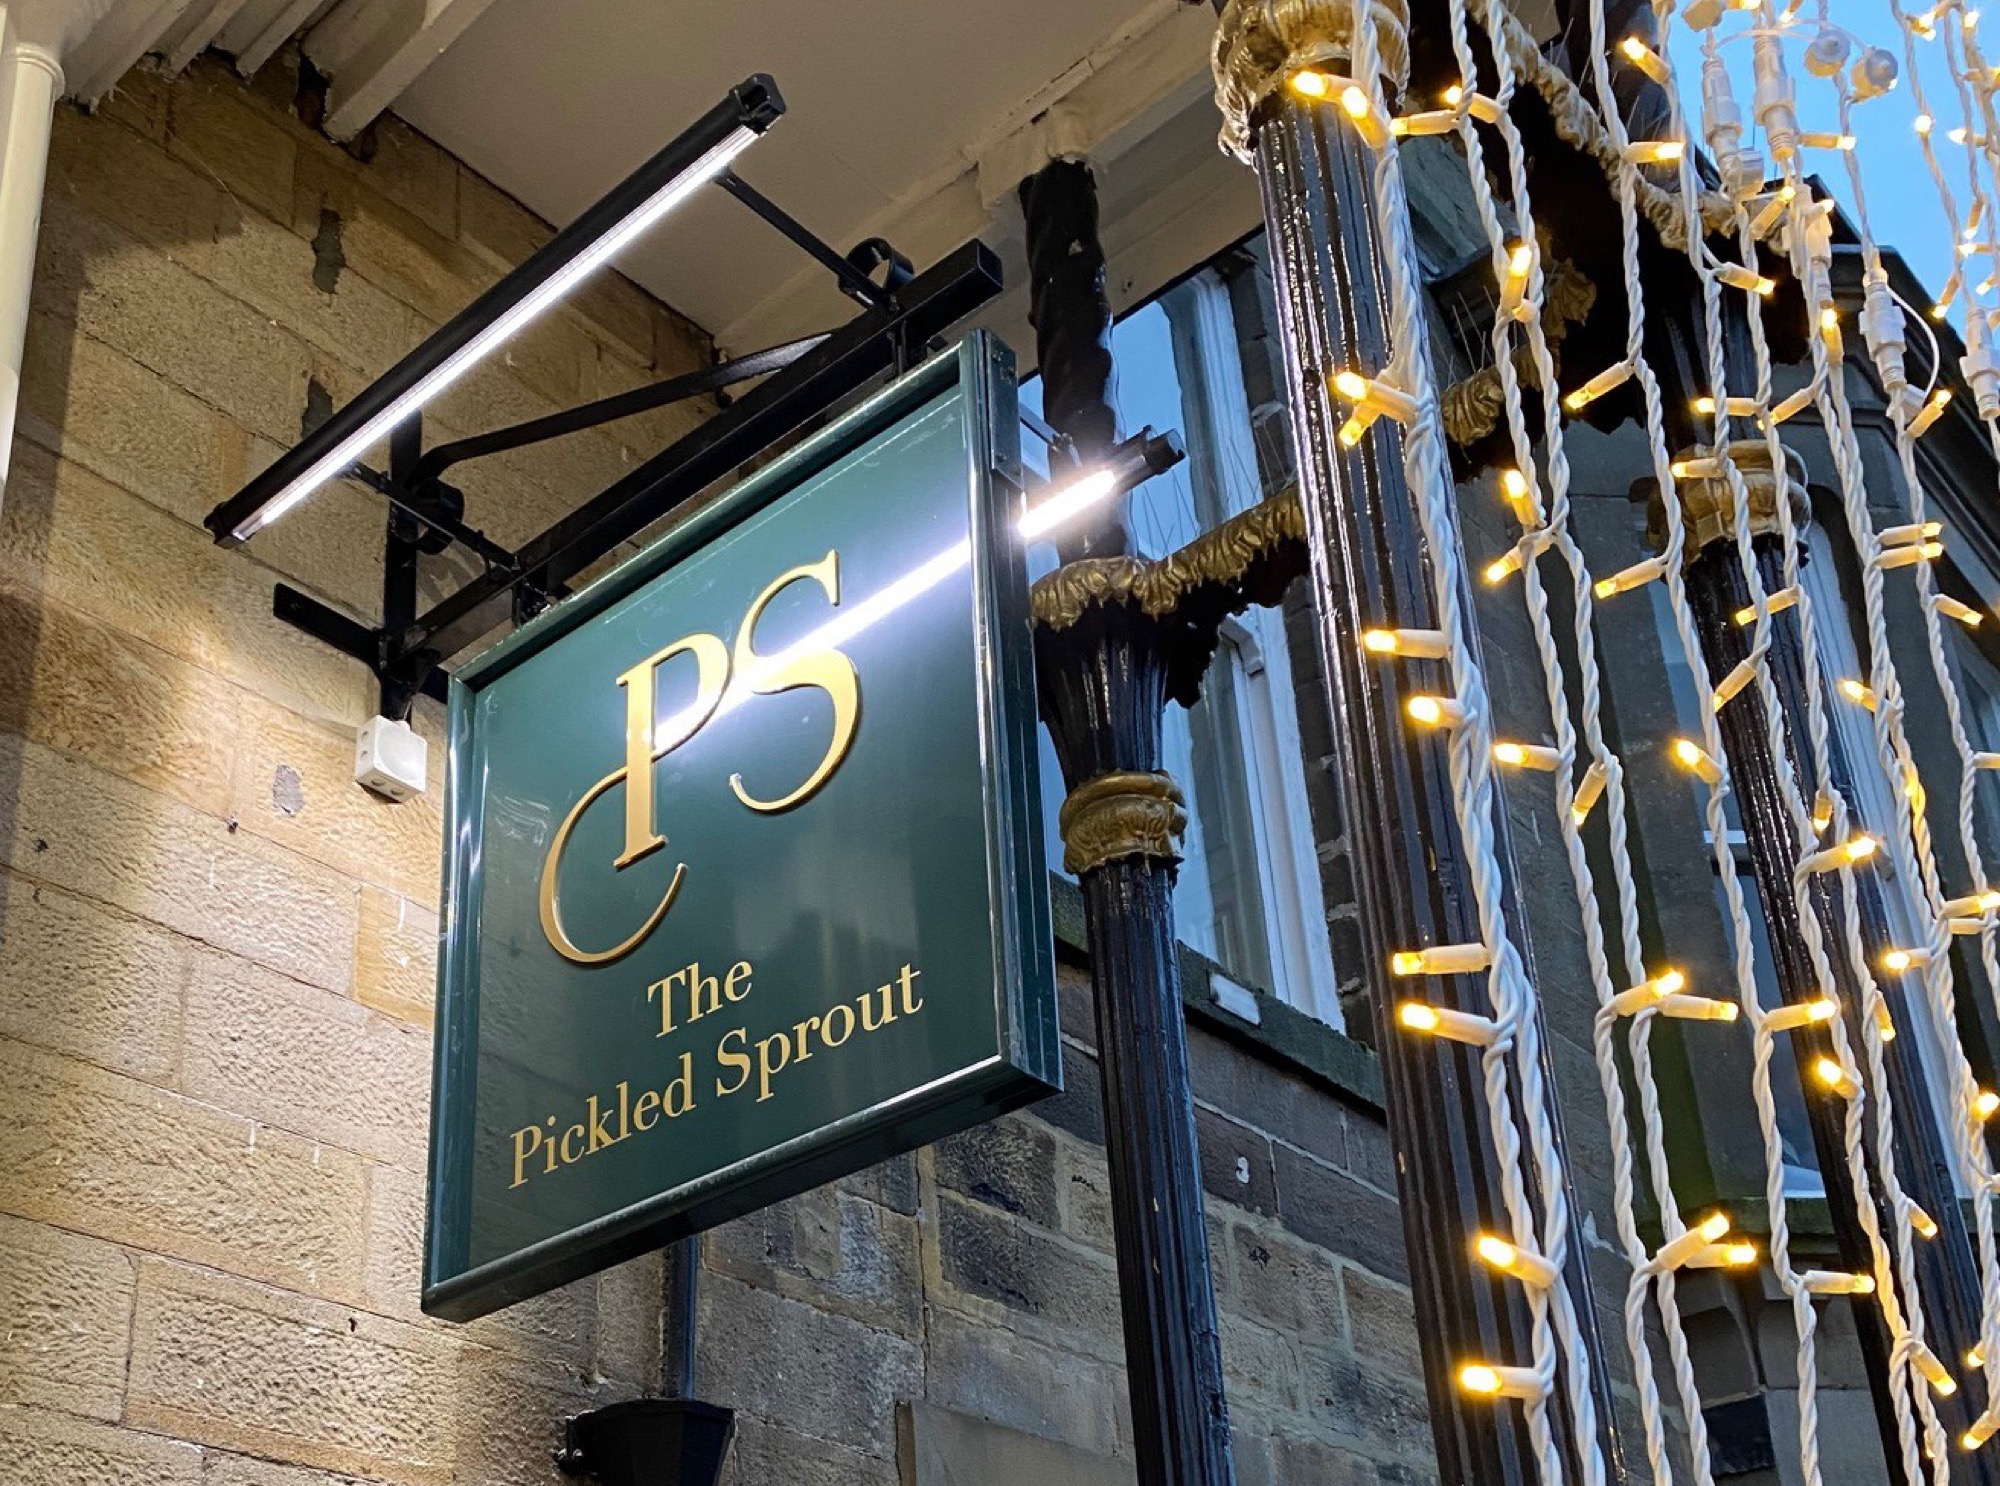 The Pickled Sprout hanging signage